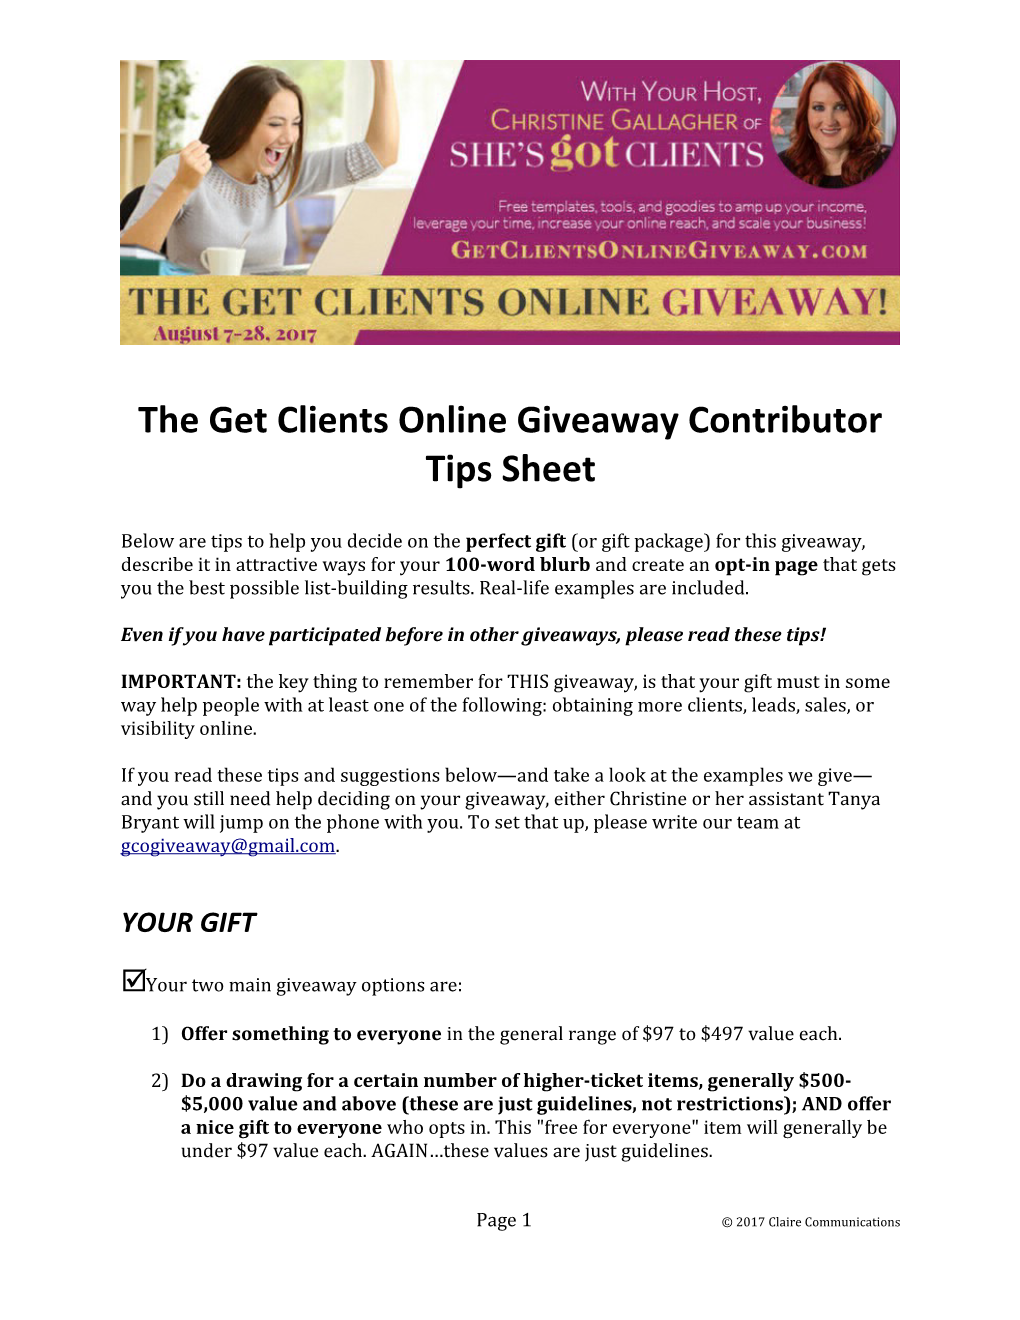 The Get Clients Online Giveaway Contributor Tips Sheet